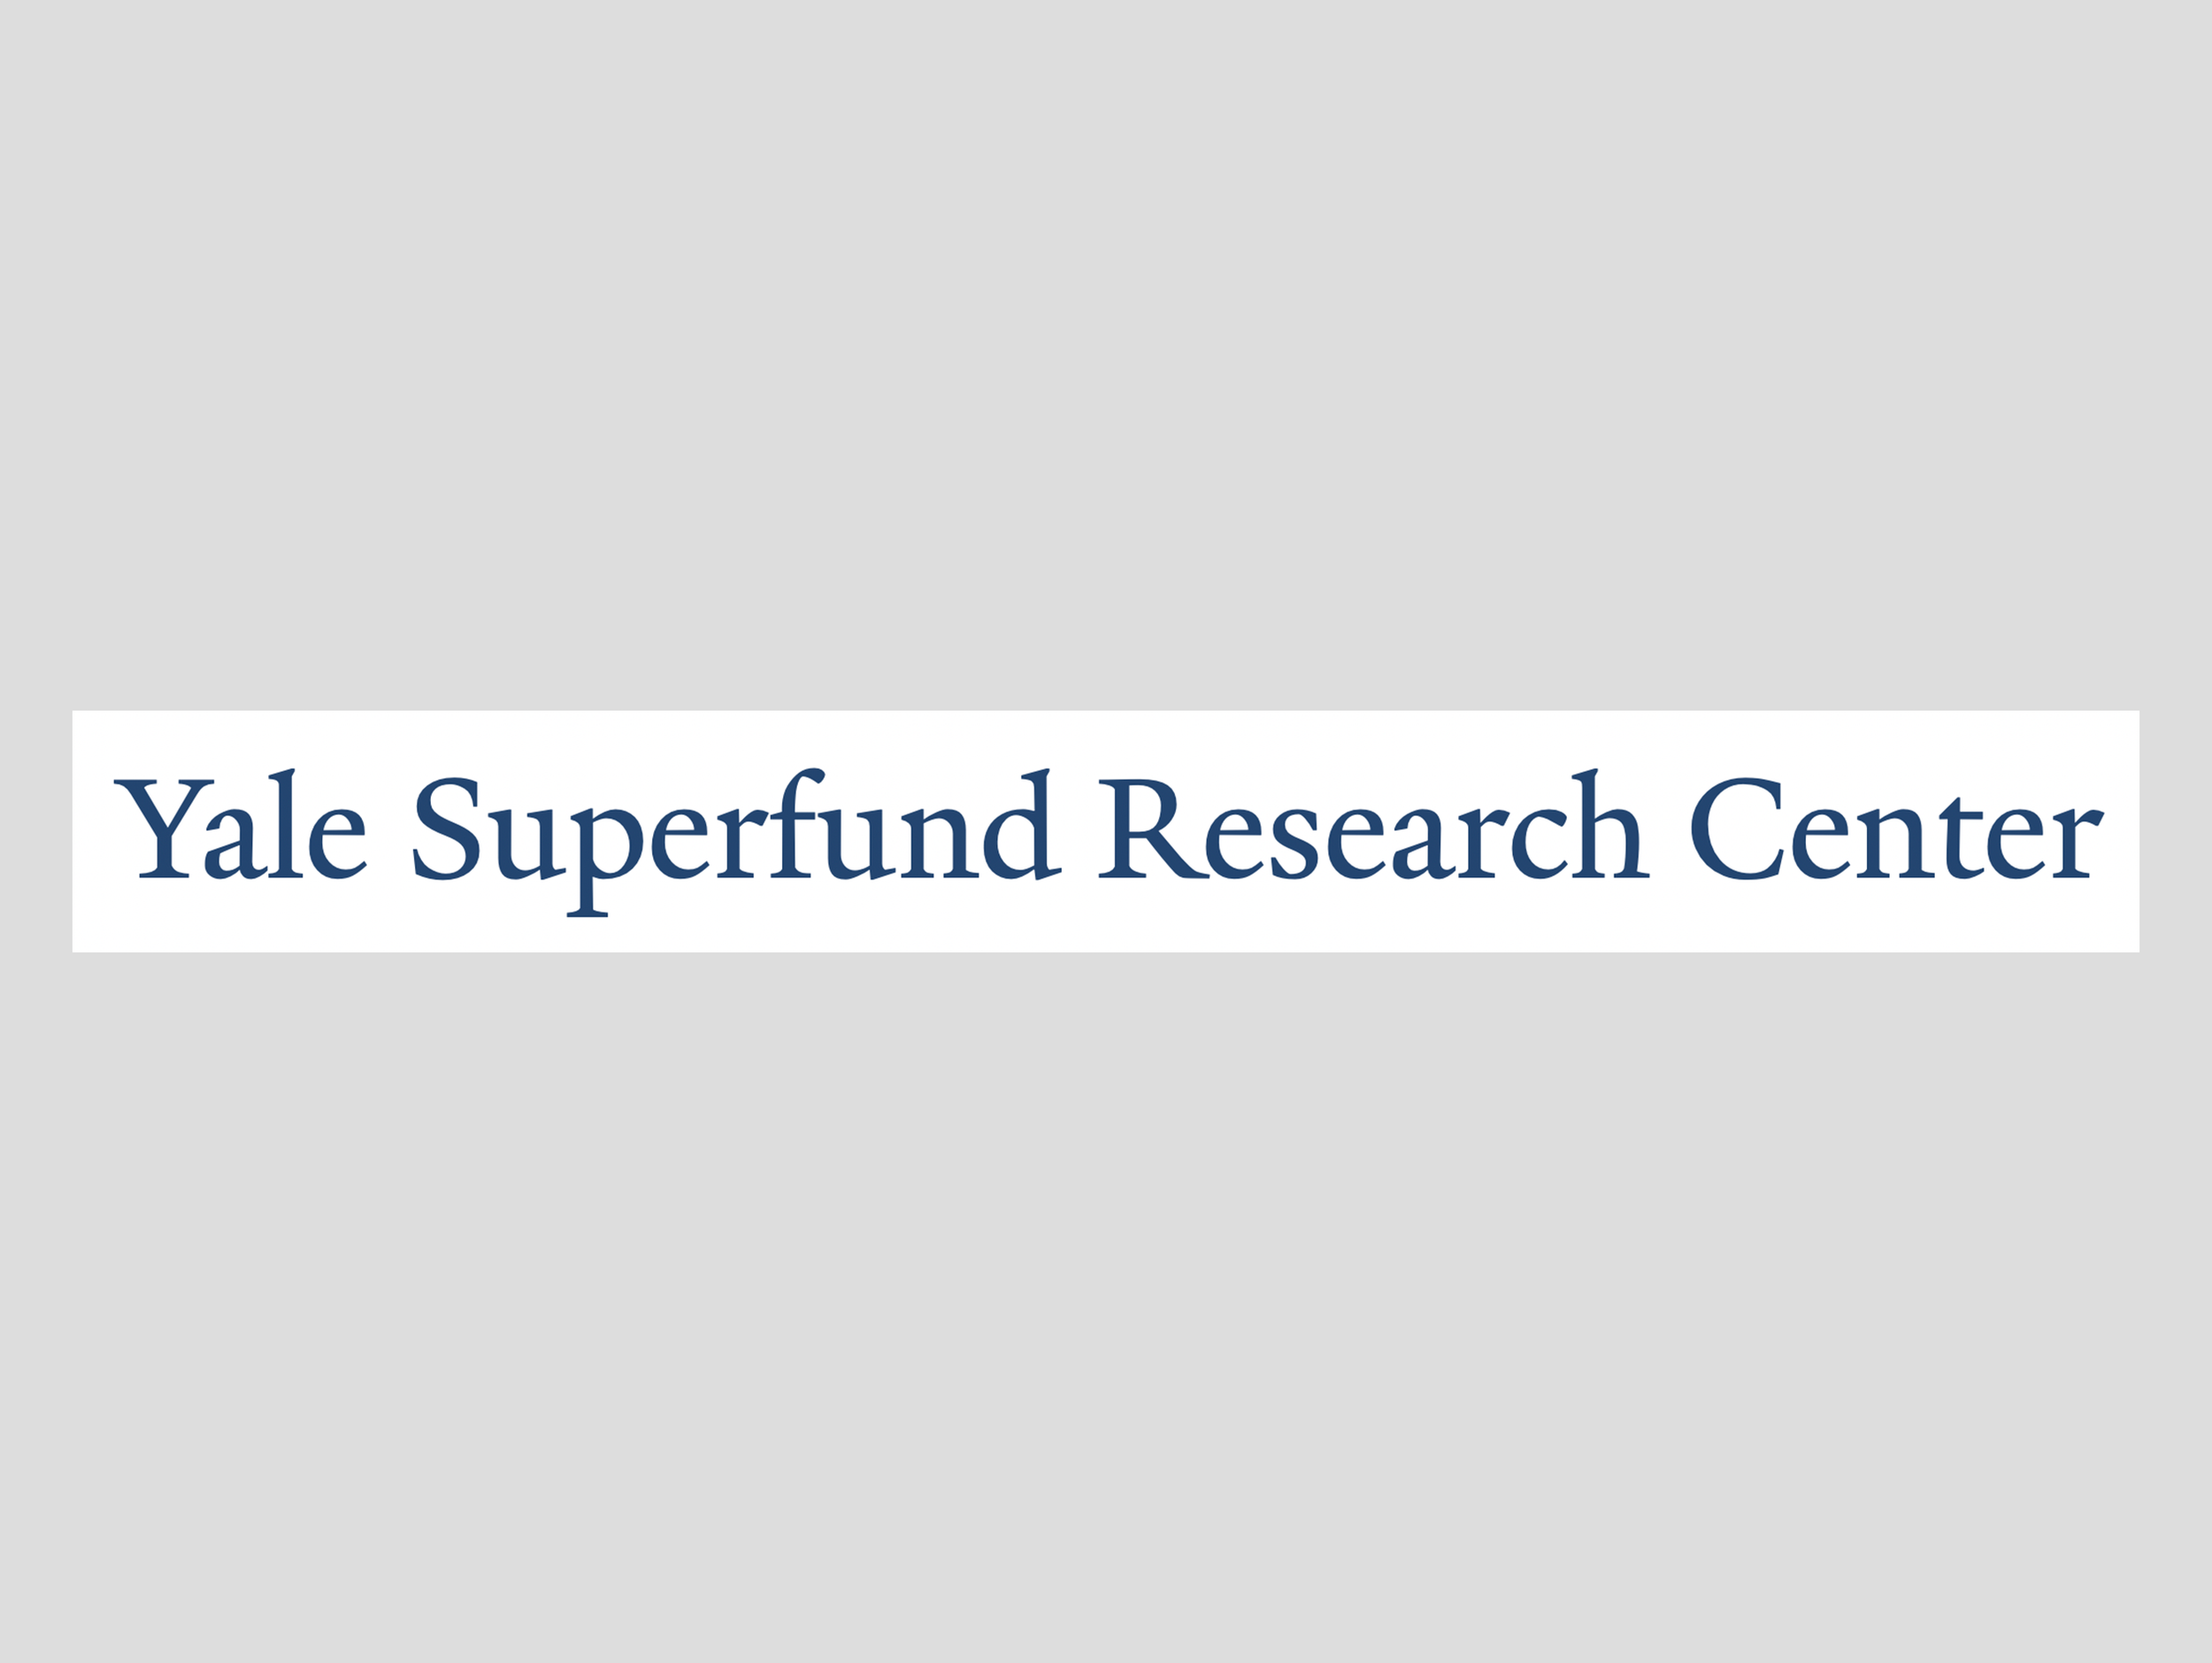 Yale Superfund Research Center CCFE Logo.png